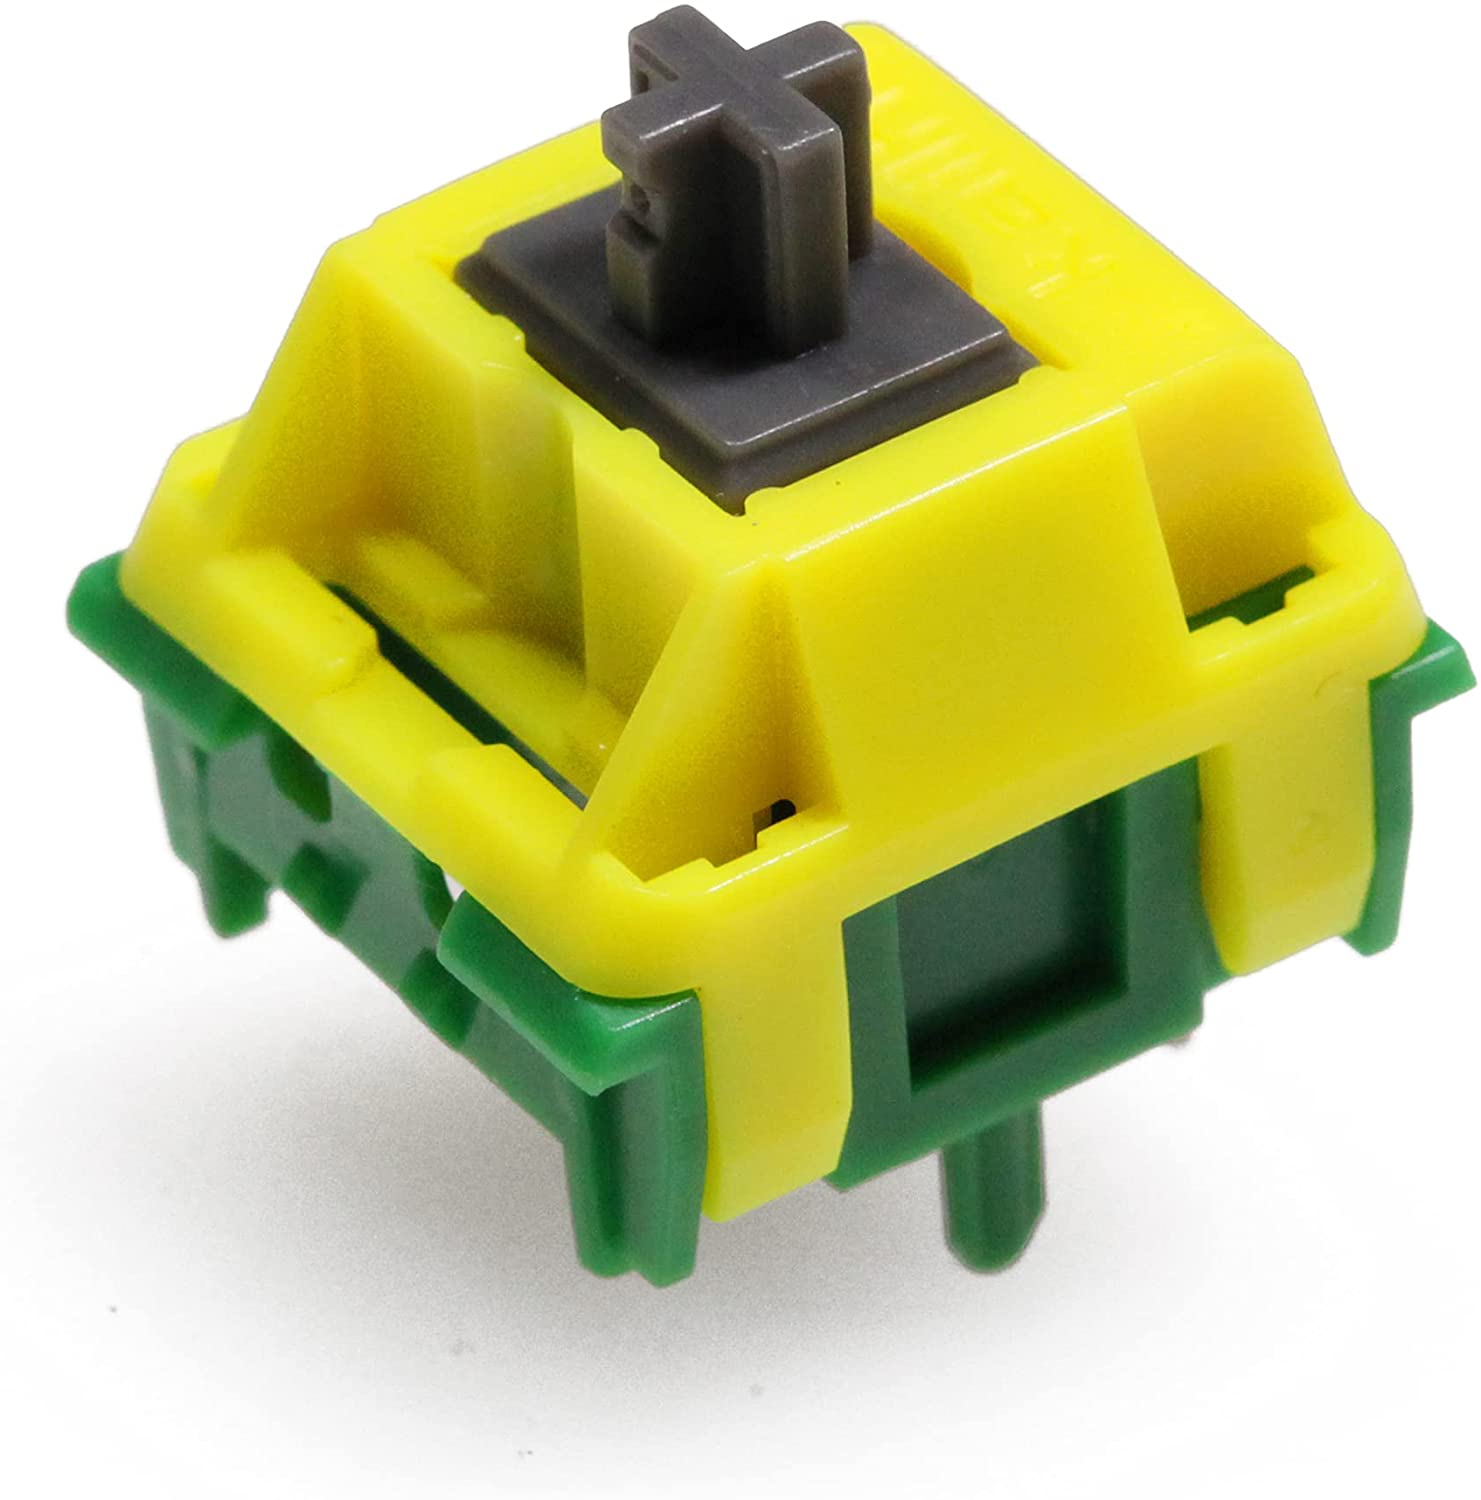 Kailh Canary 60g Tactile PCB Mount Switch MKSMBQF0CS |0|